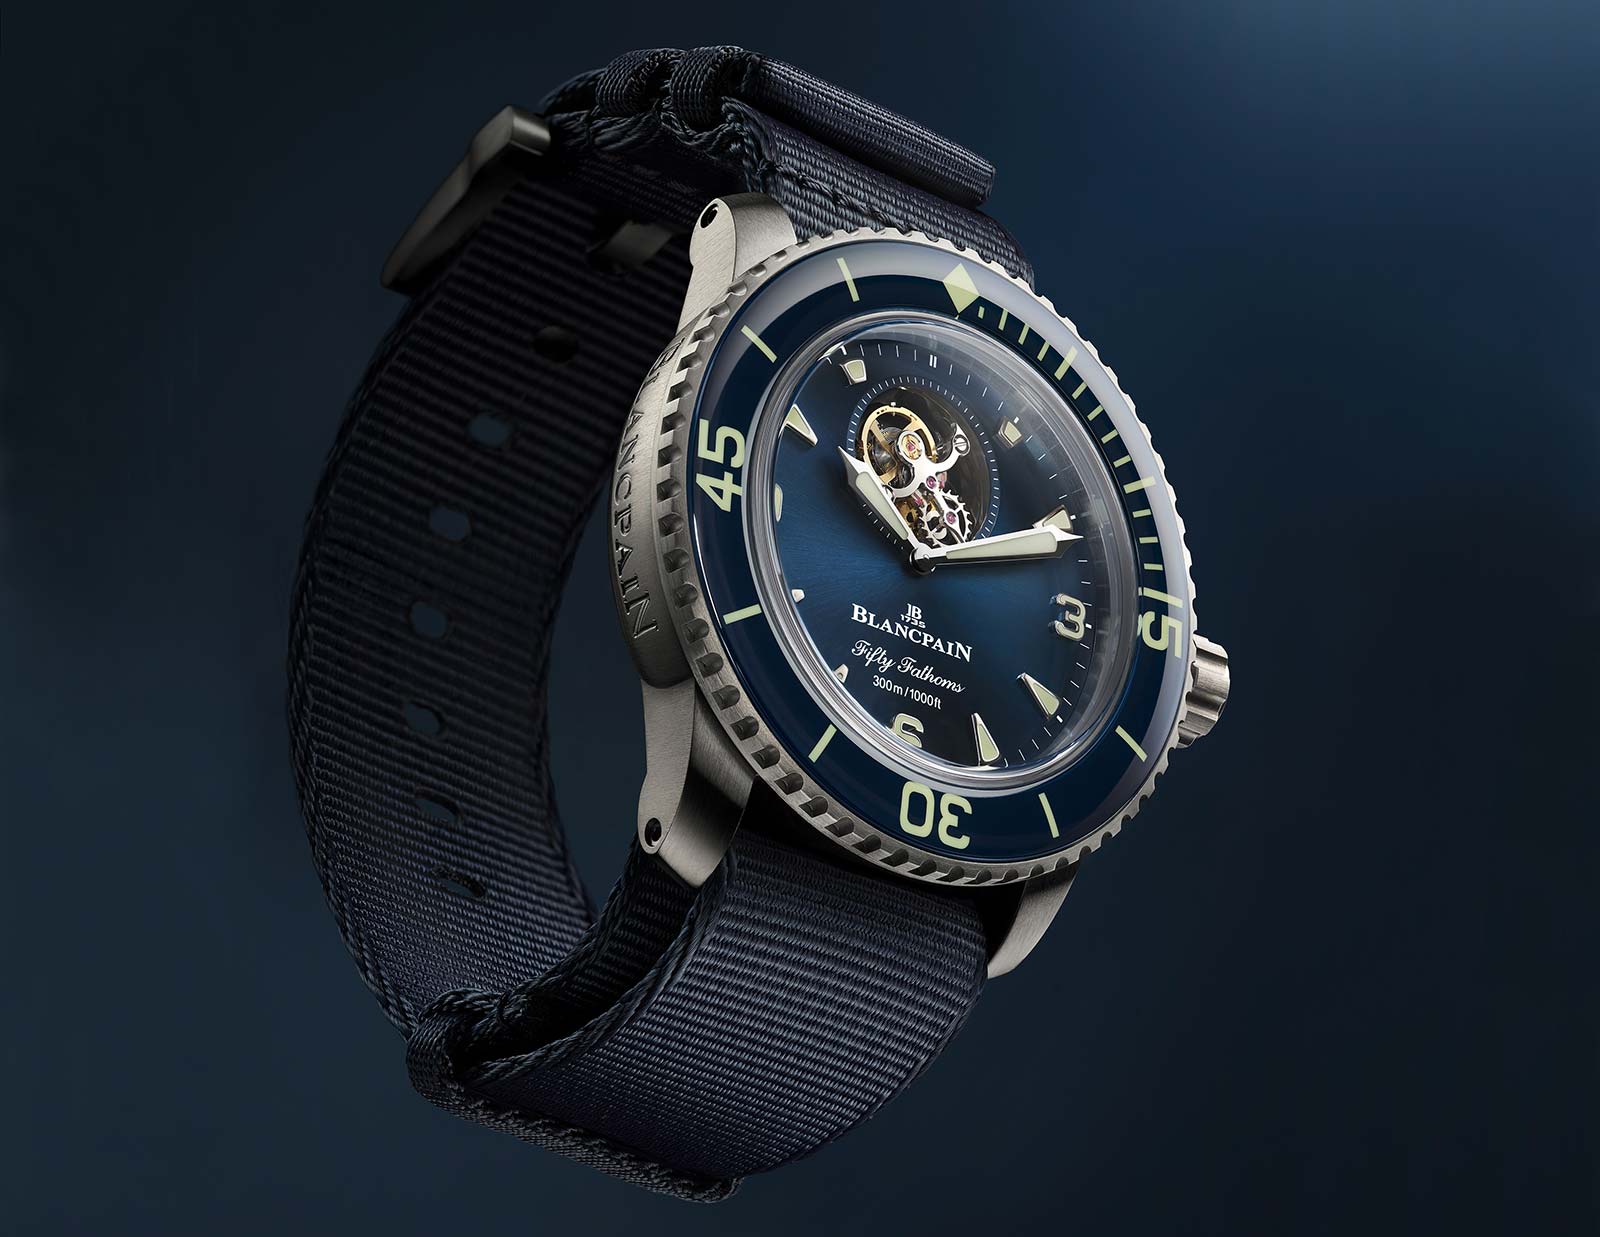 Introducing The Blancpain Fifty Fathoms Tourbillon 8 Jours Watches